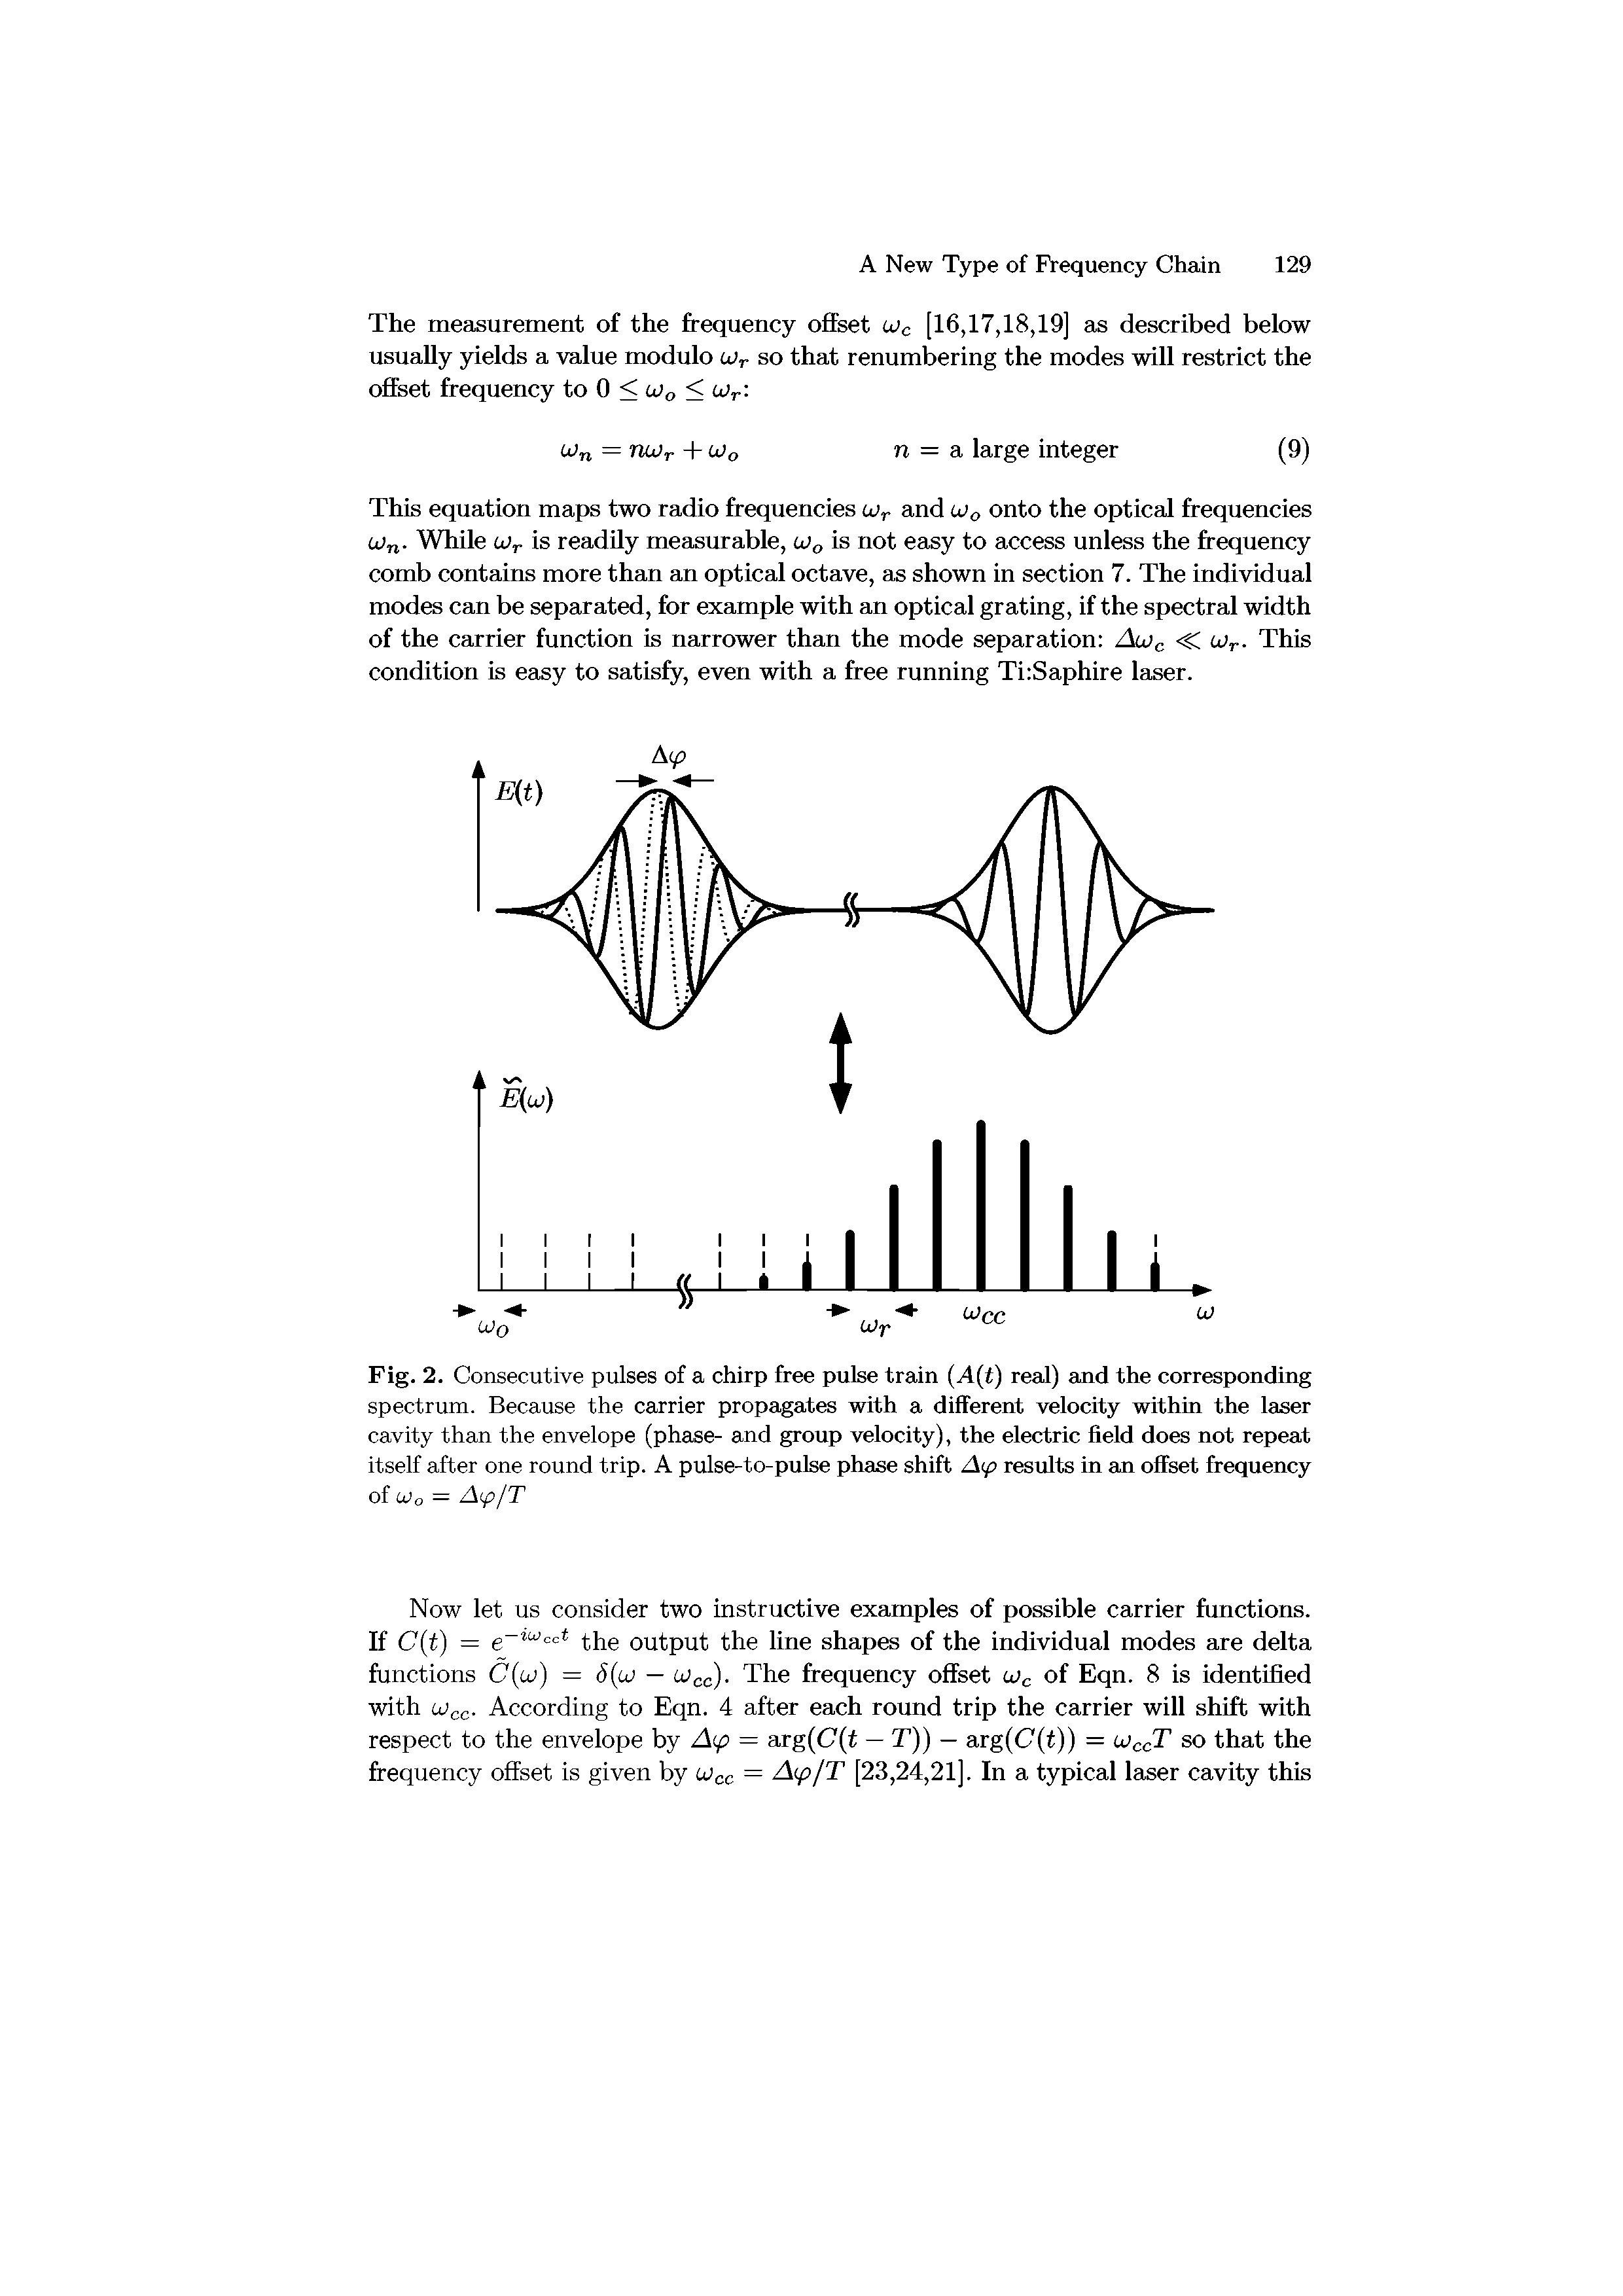 Fig. 2. Consecutive pulses of a chirp free pulse train (A(t) real) and the corresponding spectrum. Because the carrier propagates with a different velocity within the laser cavity than the envelope (phase- and group velocity), the electric field does not repeat itself after one round trip. A pulse-to-pulse phase shift Aip results in an offset frequency...